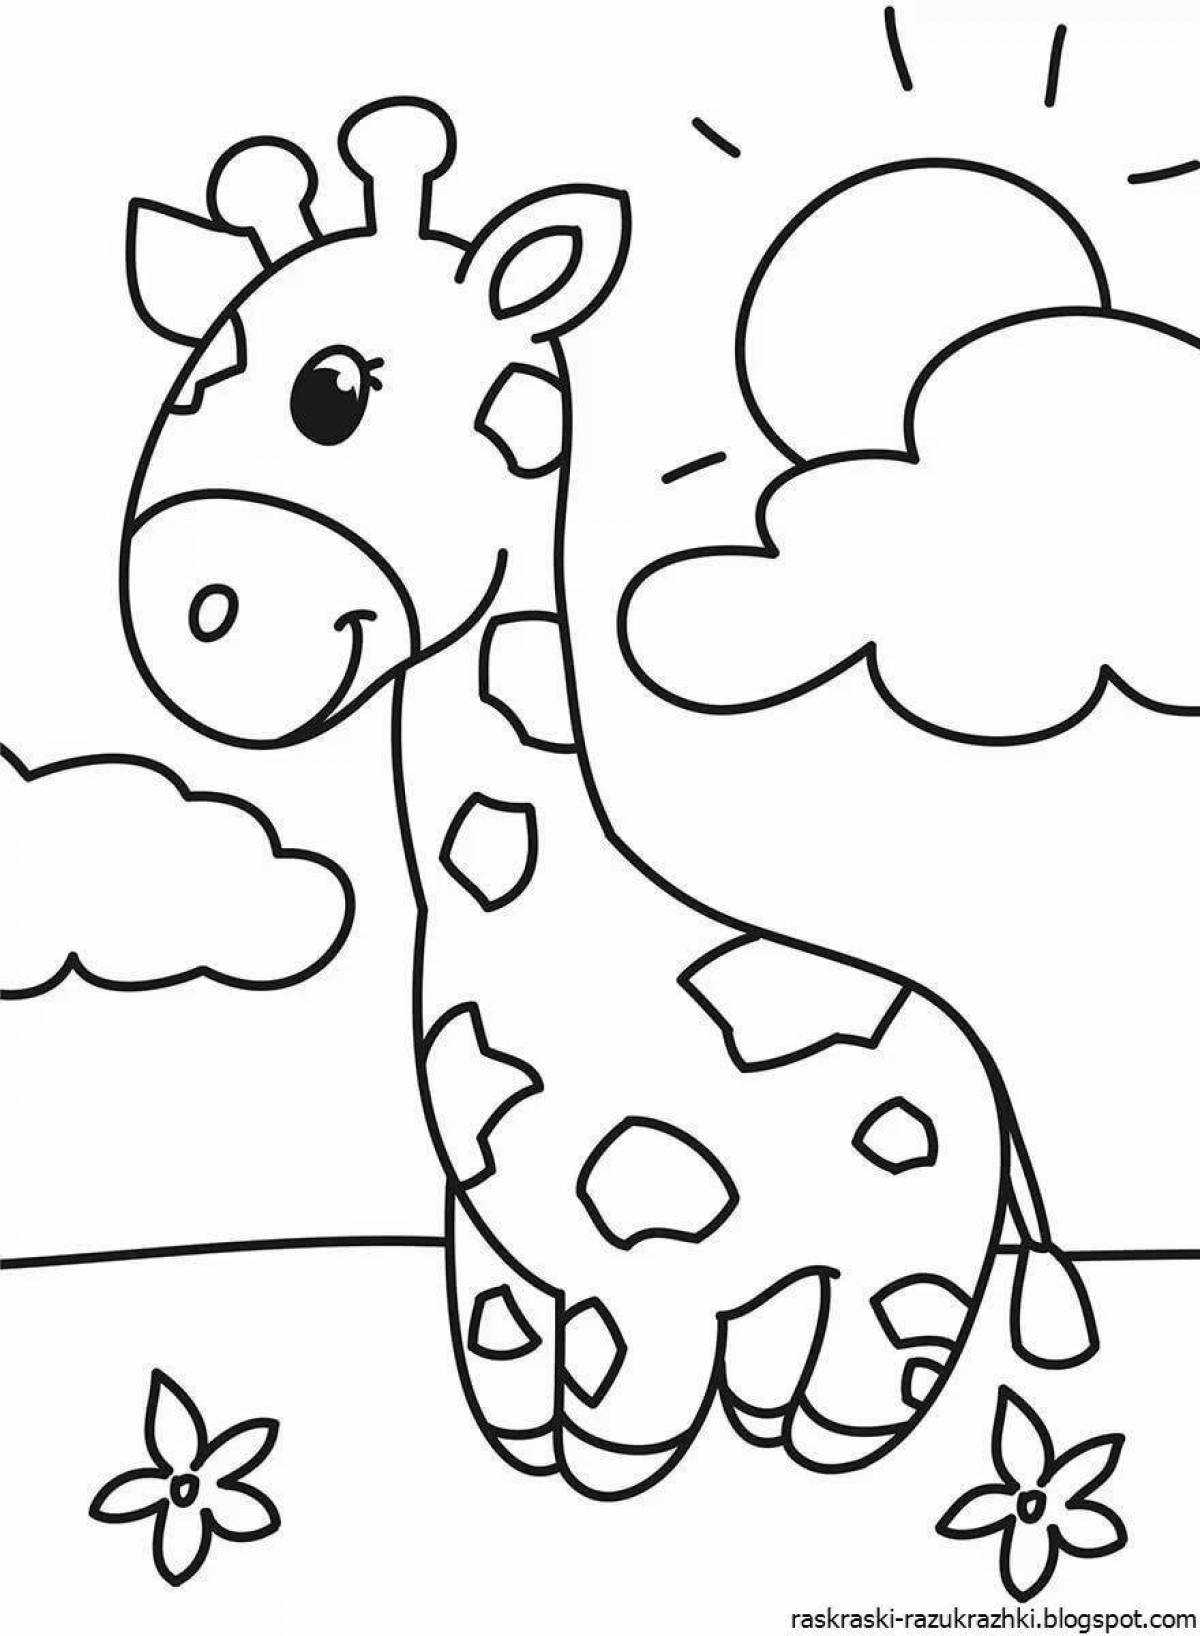 Creative coloring book interesting for kids